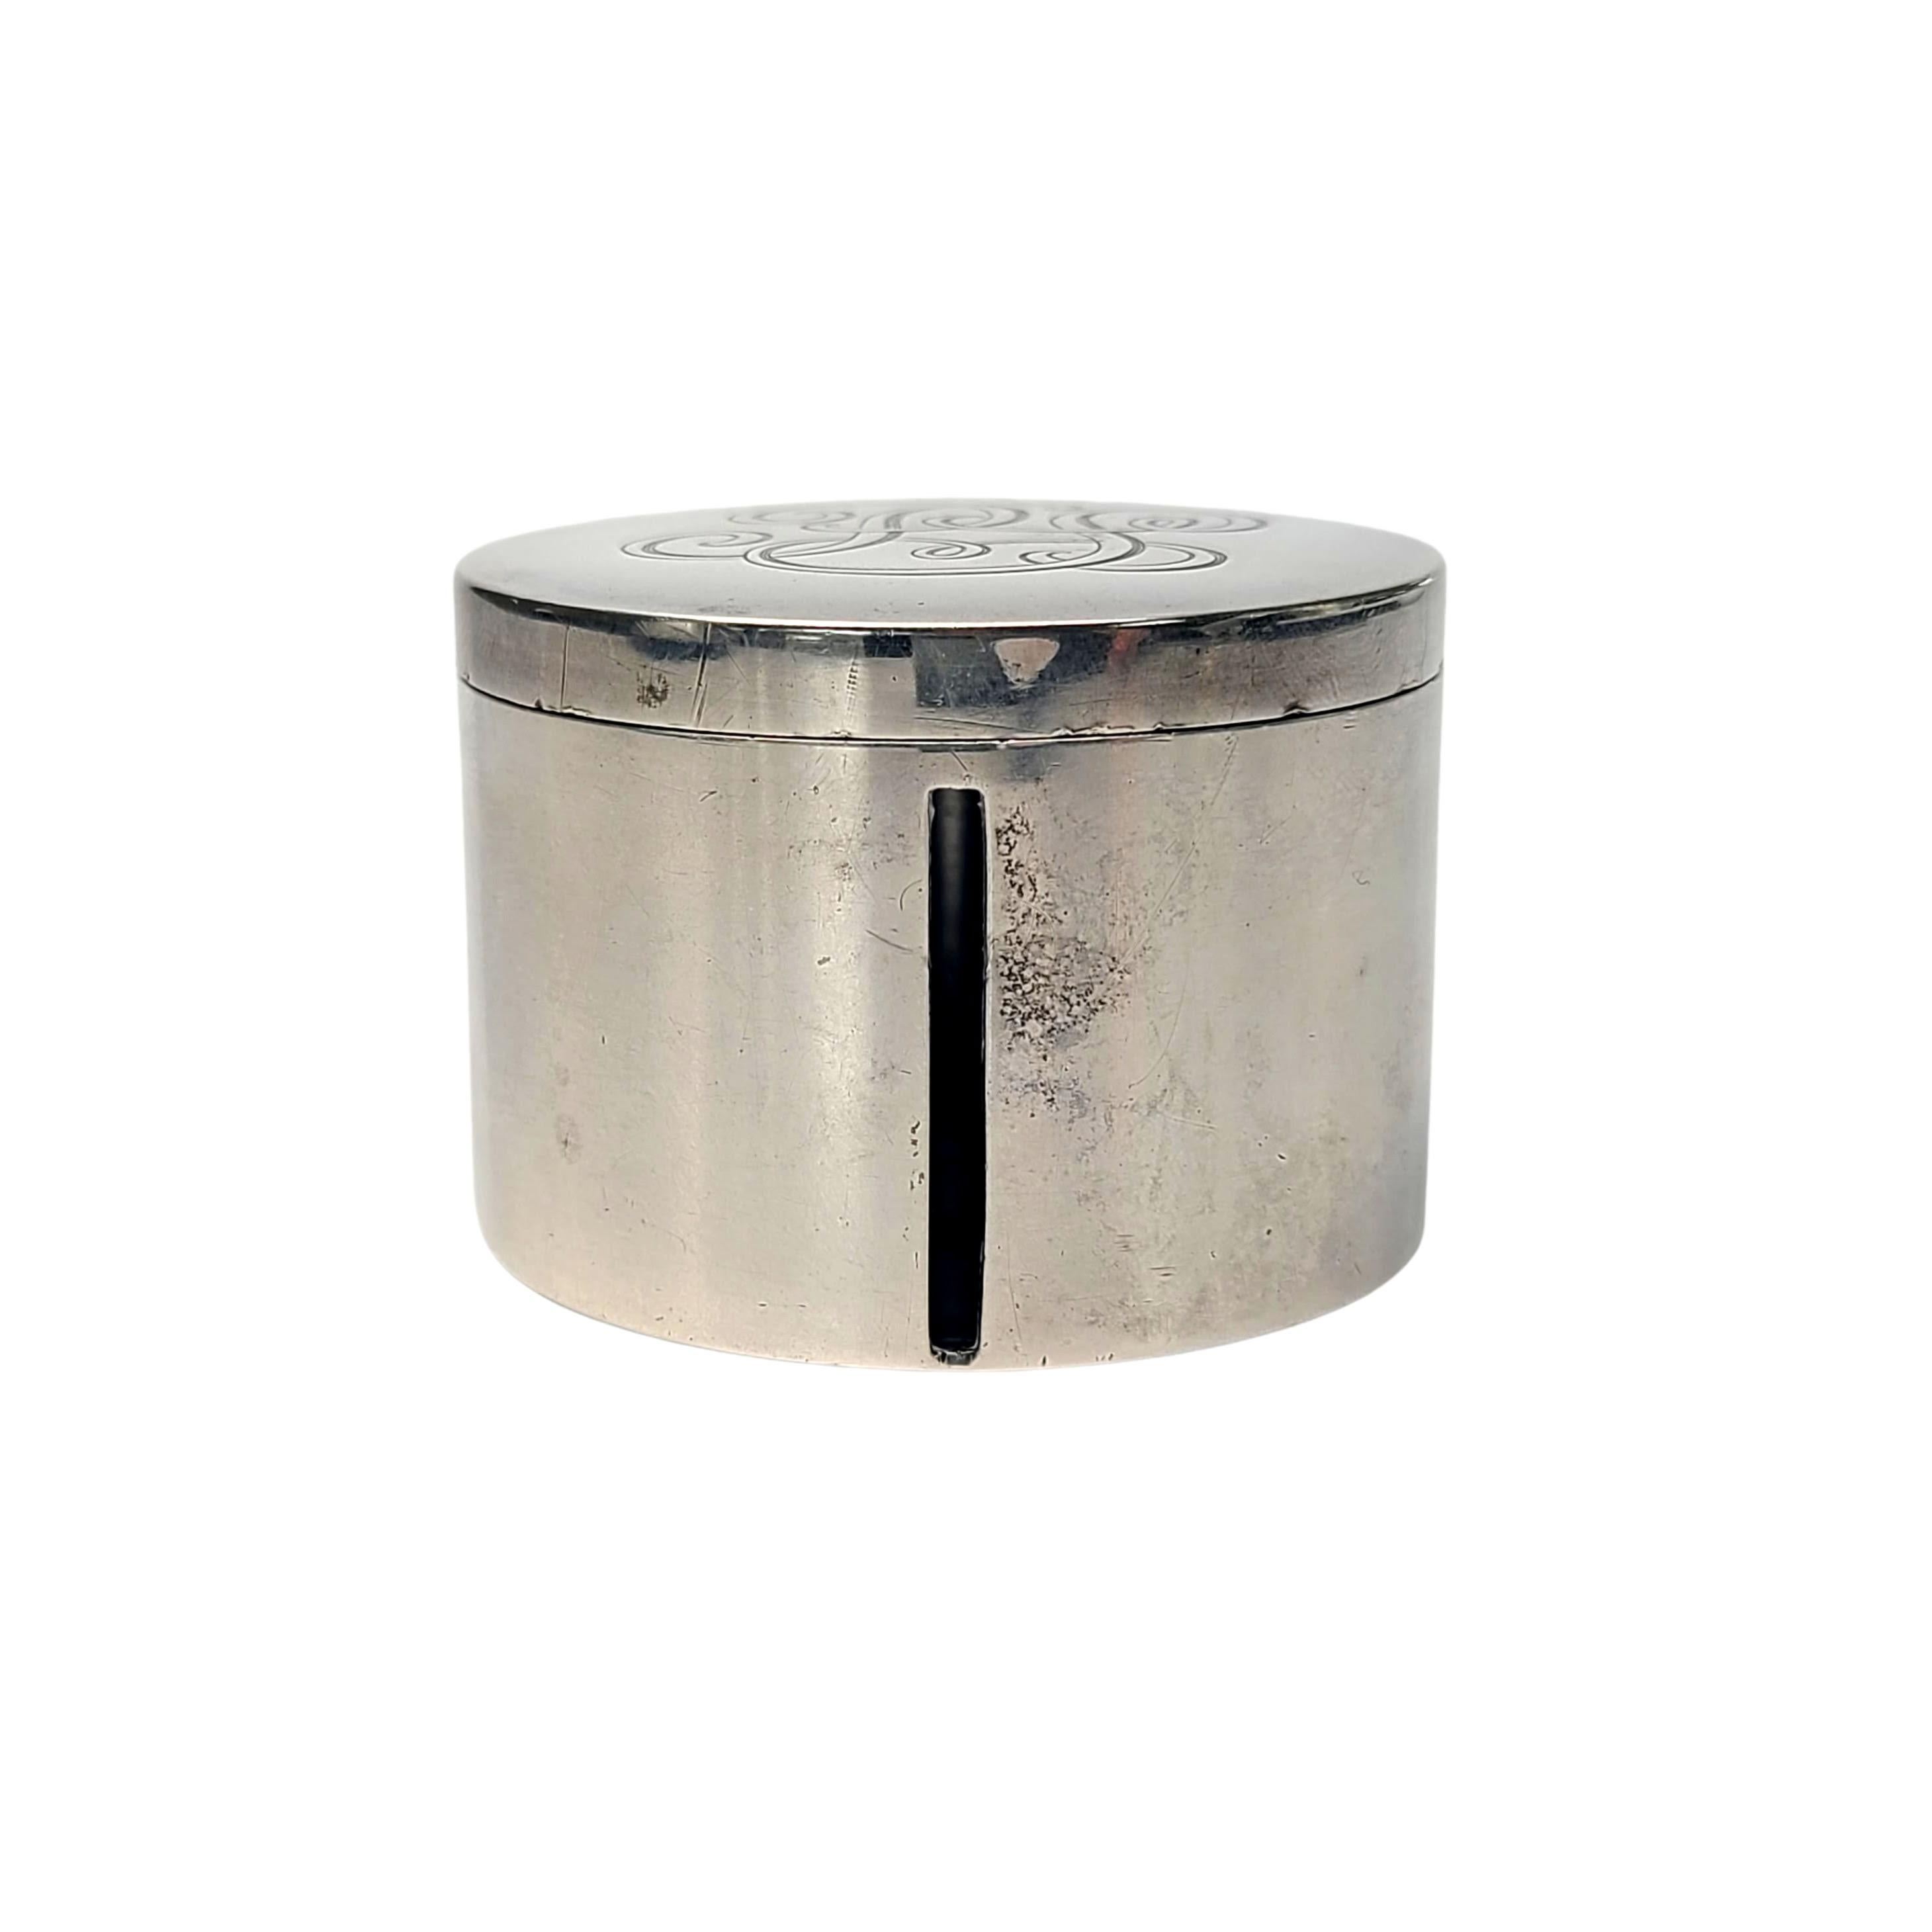 Sterling silver round box for postage stamps by Currier & Roby.

Monogram appears to be PS

A small round box with a lid, stamps can be dispensed from a roll thru the vertical slot in the side of the box. Currier & Roby was active from 1900 thru